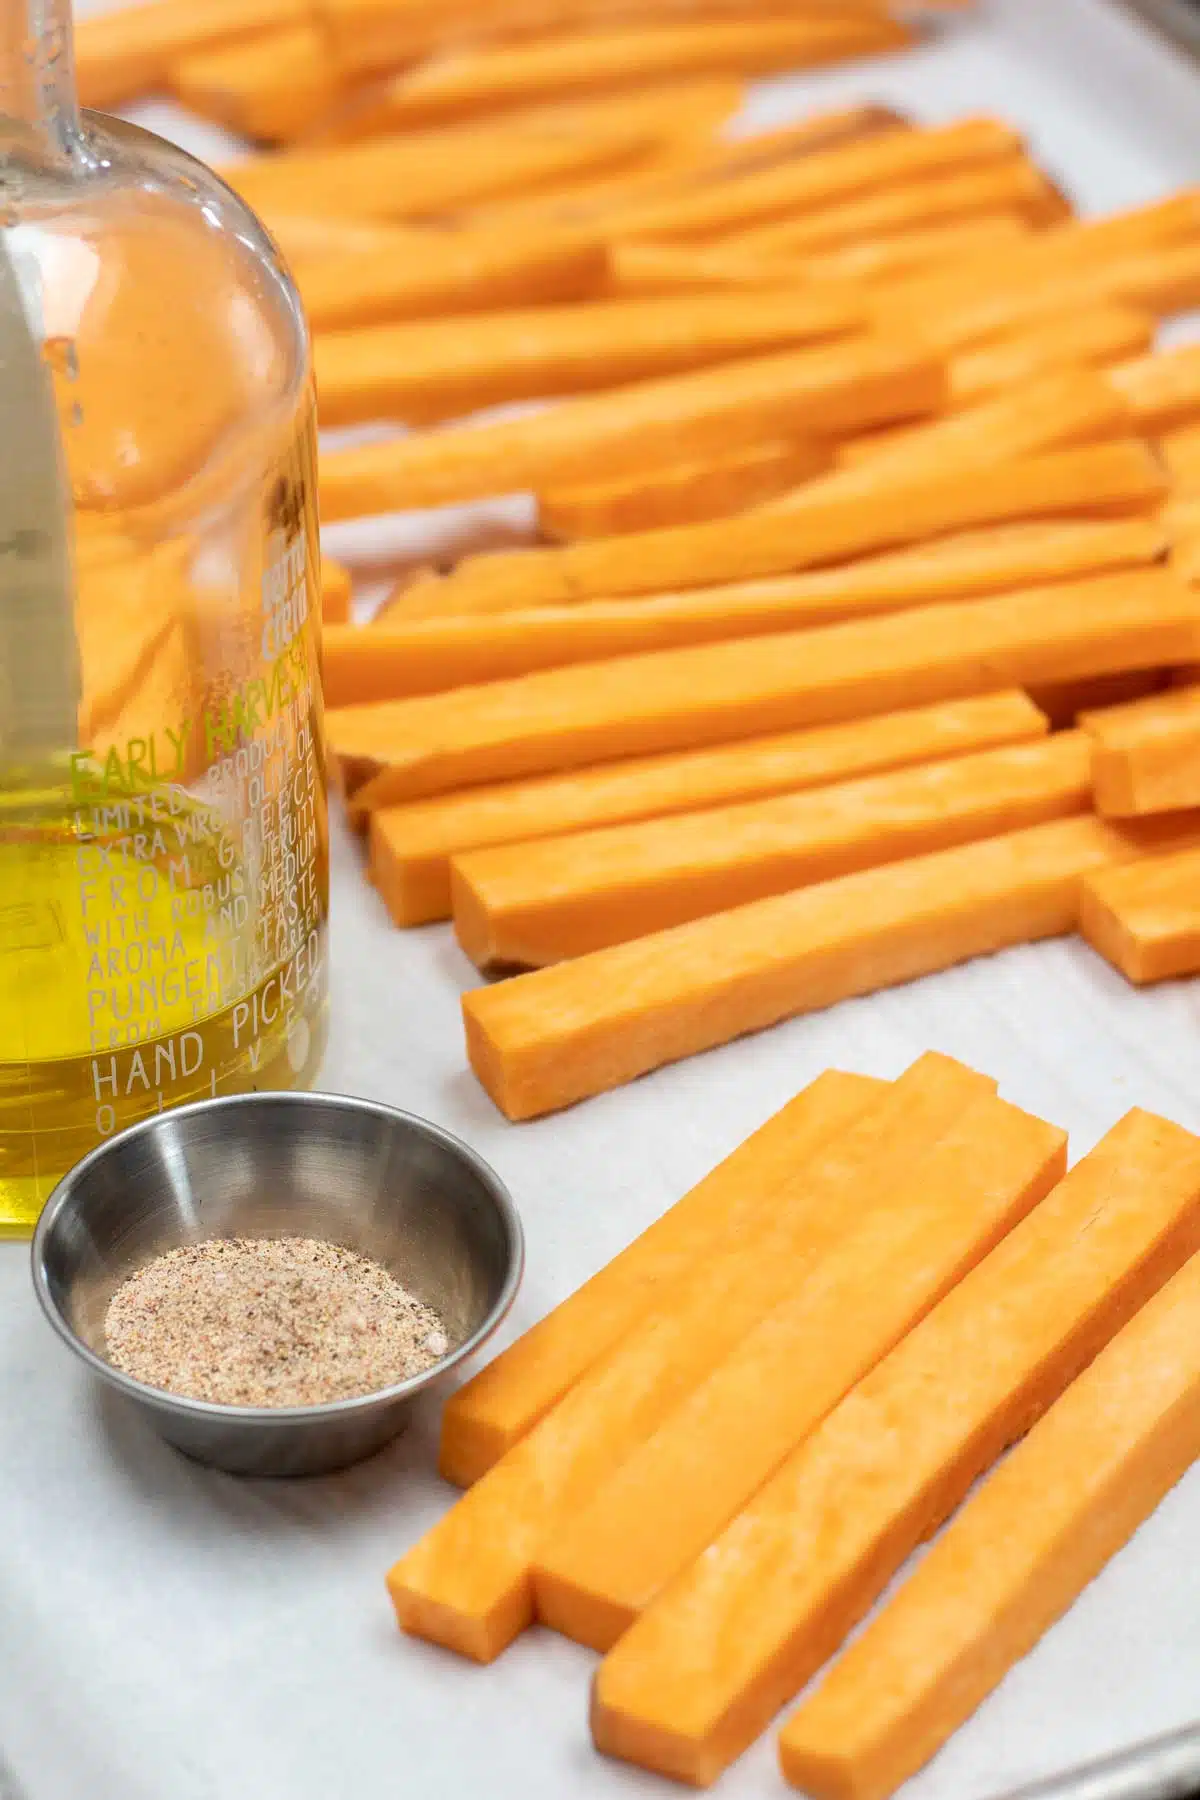 Tall image showing ingredients for sweet potato fries.